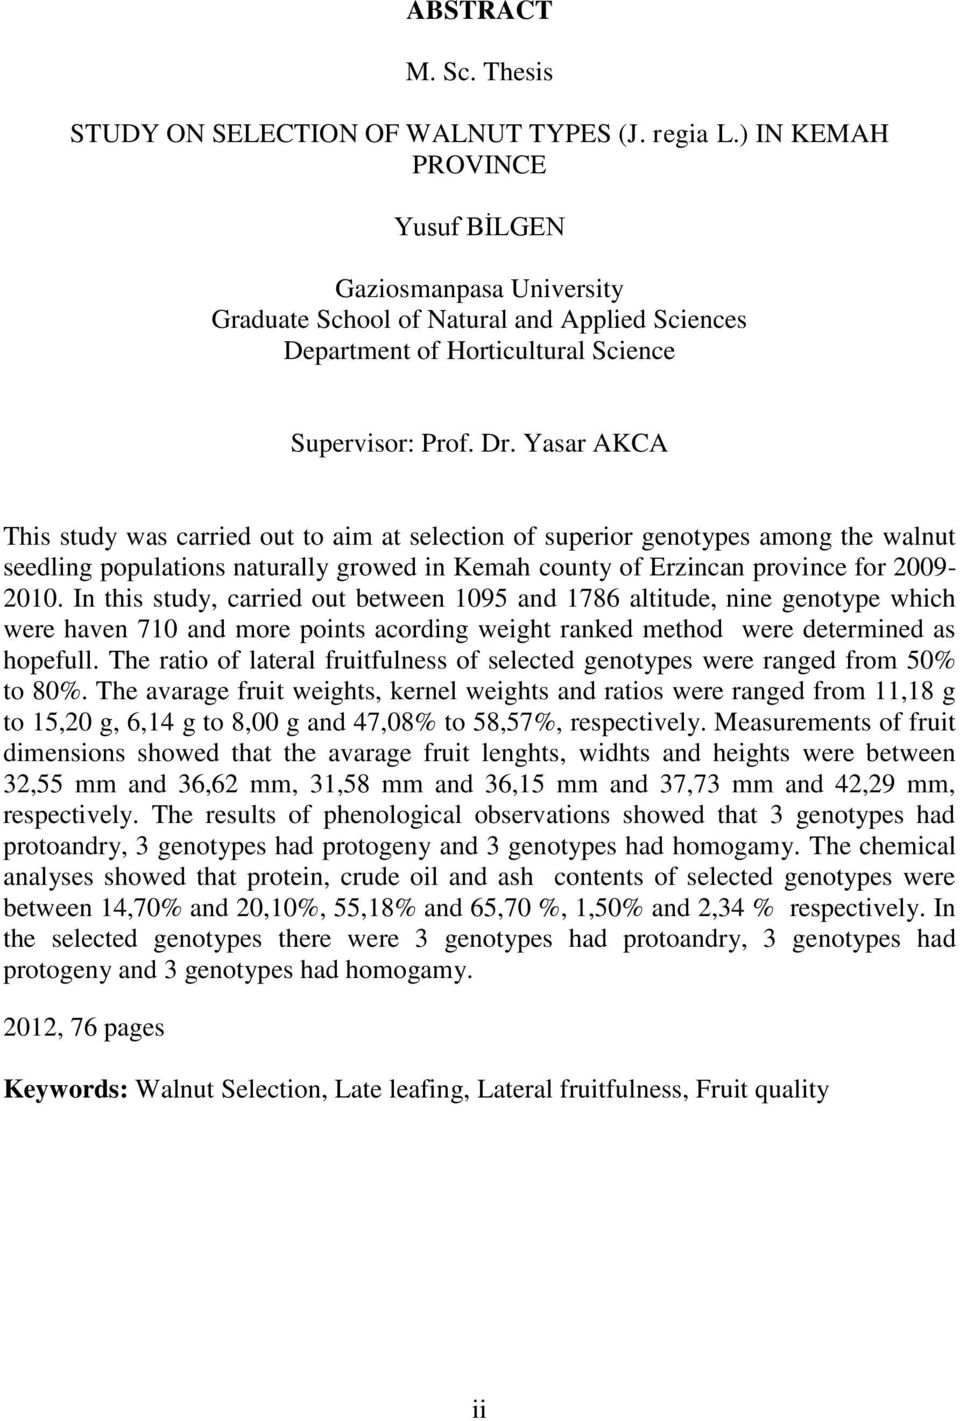 Yasar AKCA This study was carried out to aim at selection of superior genotypes among the walnut seedling populations naturally growed in Kemah county of Erzincan province for 2009-2010.